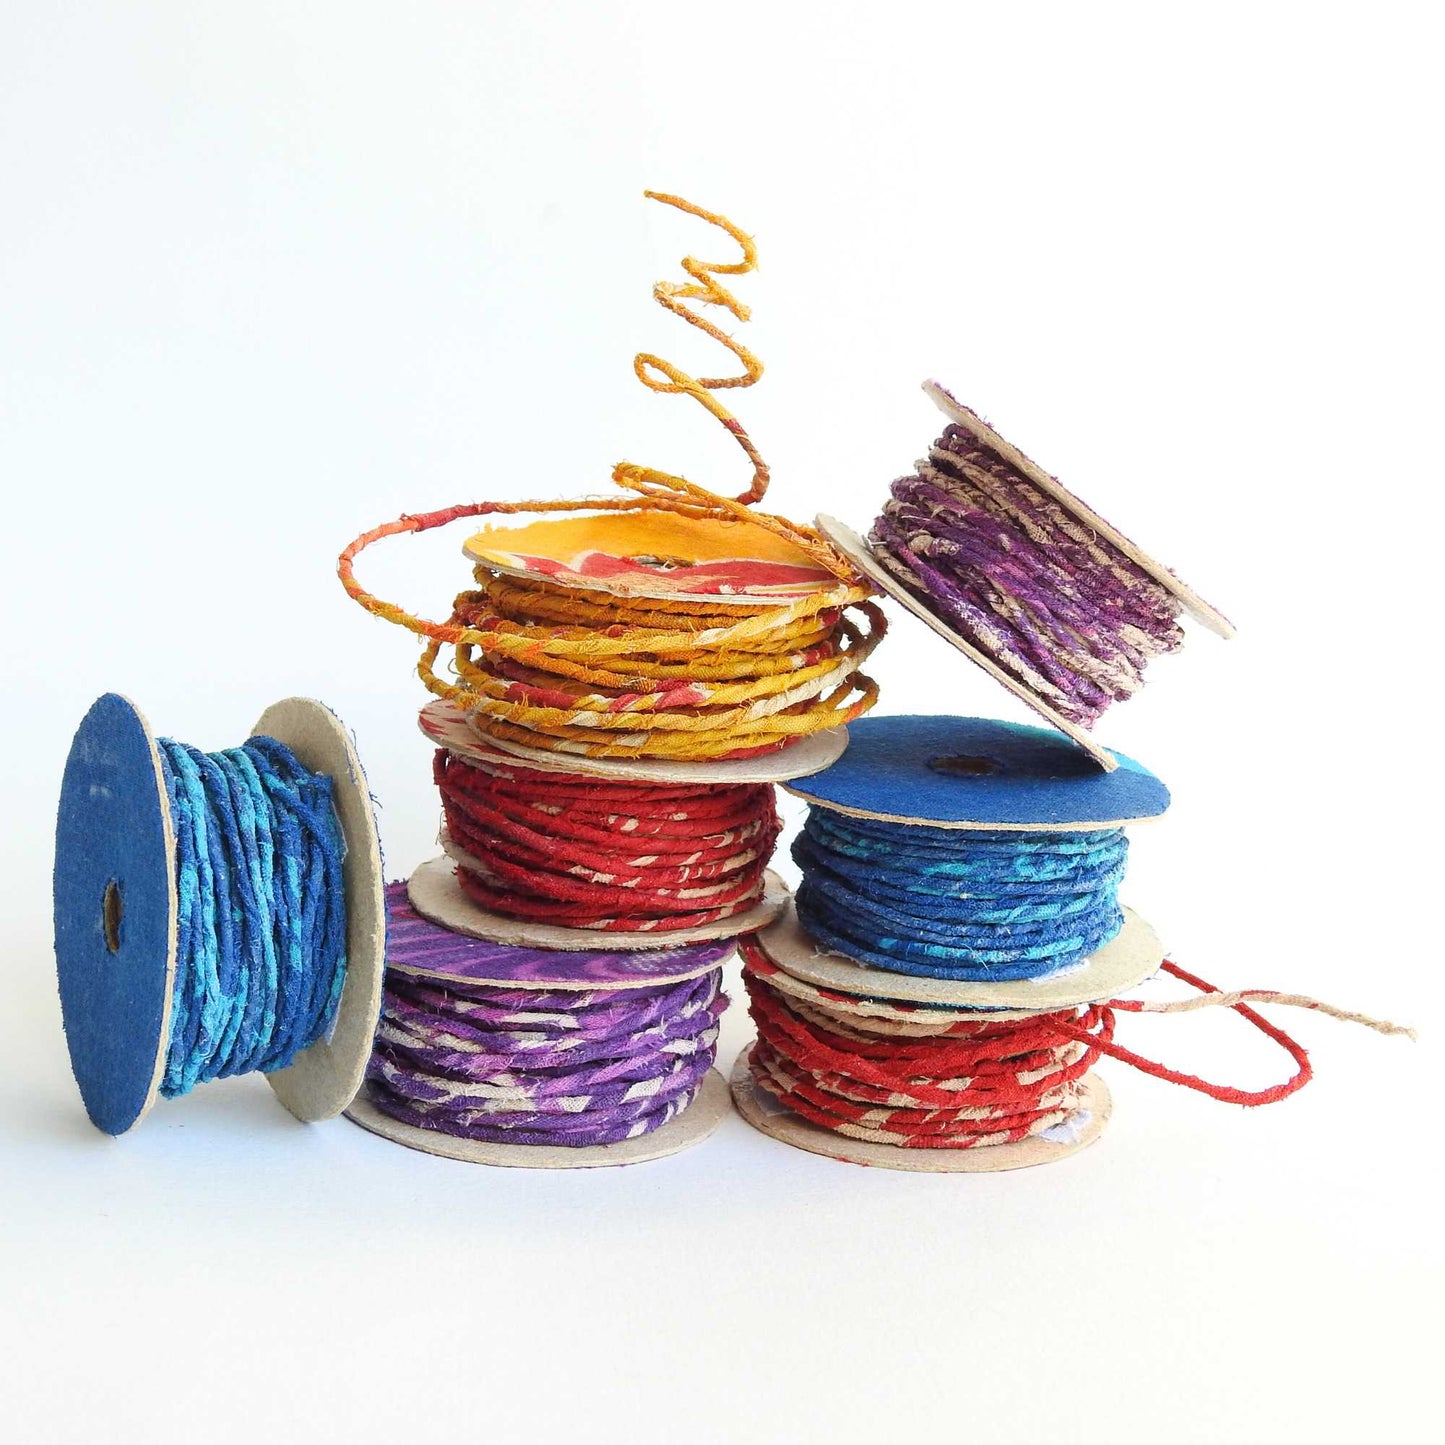 Reels of fairtrade craft wire for beading, craft, amigumuri, flowers, headbands, jewelry. Cloth covered flexible wire. Handmade using upcycled cotton saris. 